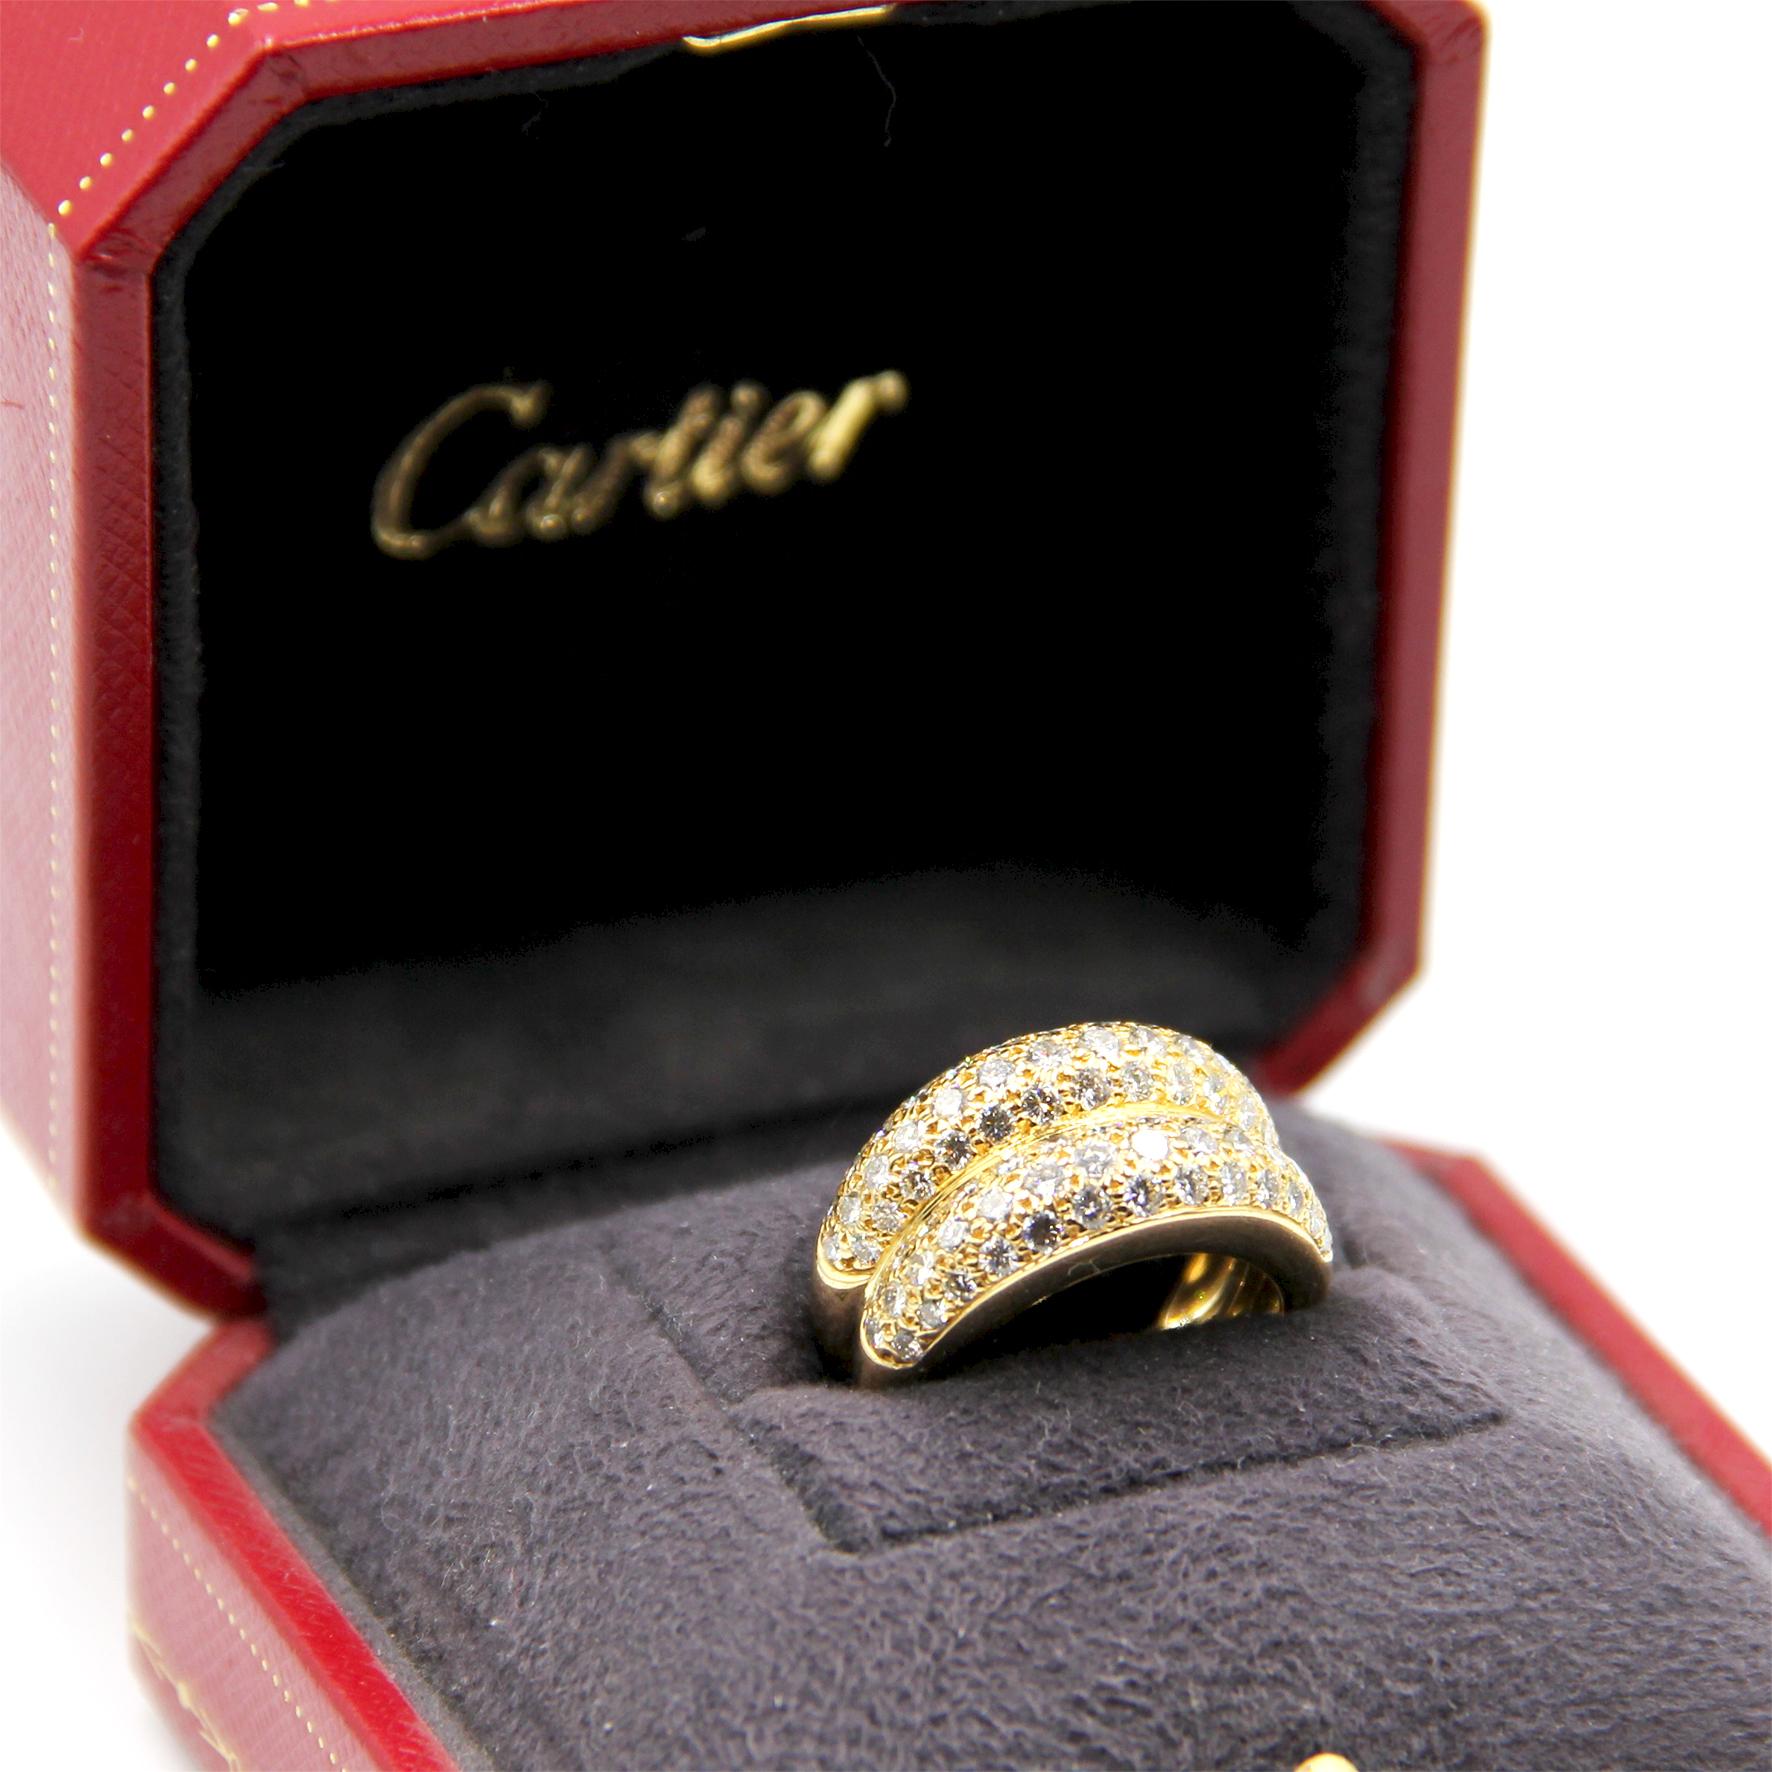 Cartier 2.50 Carat Diamond Bombe 18k Gold Ring For Sale 1